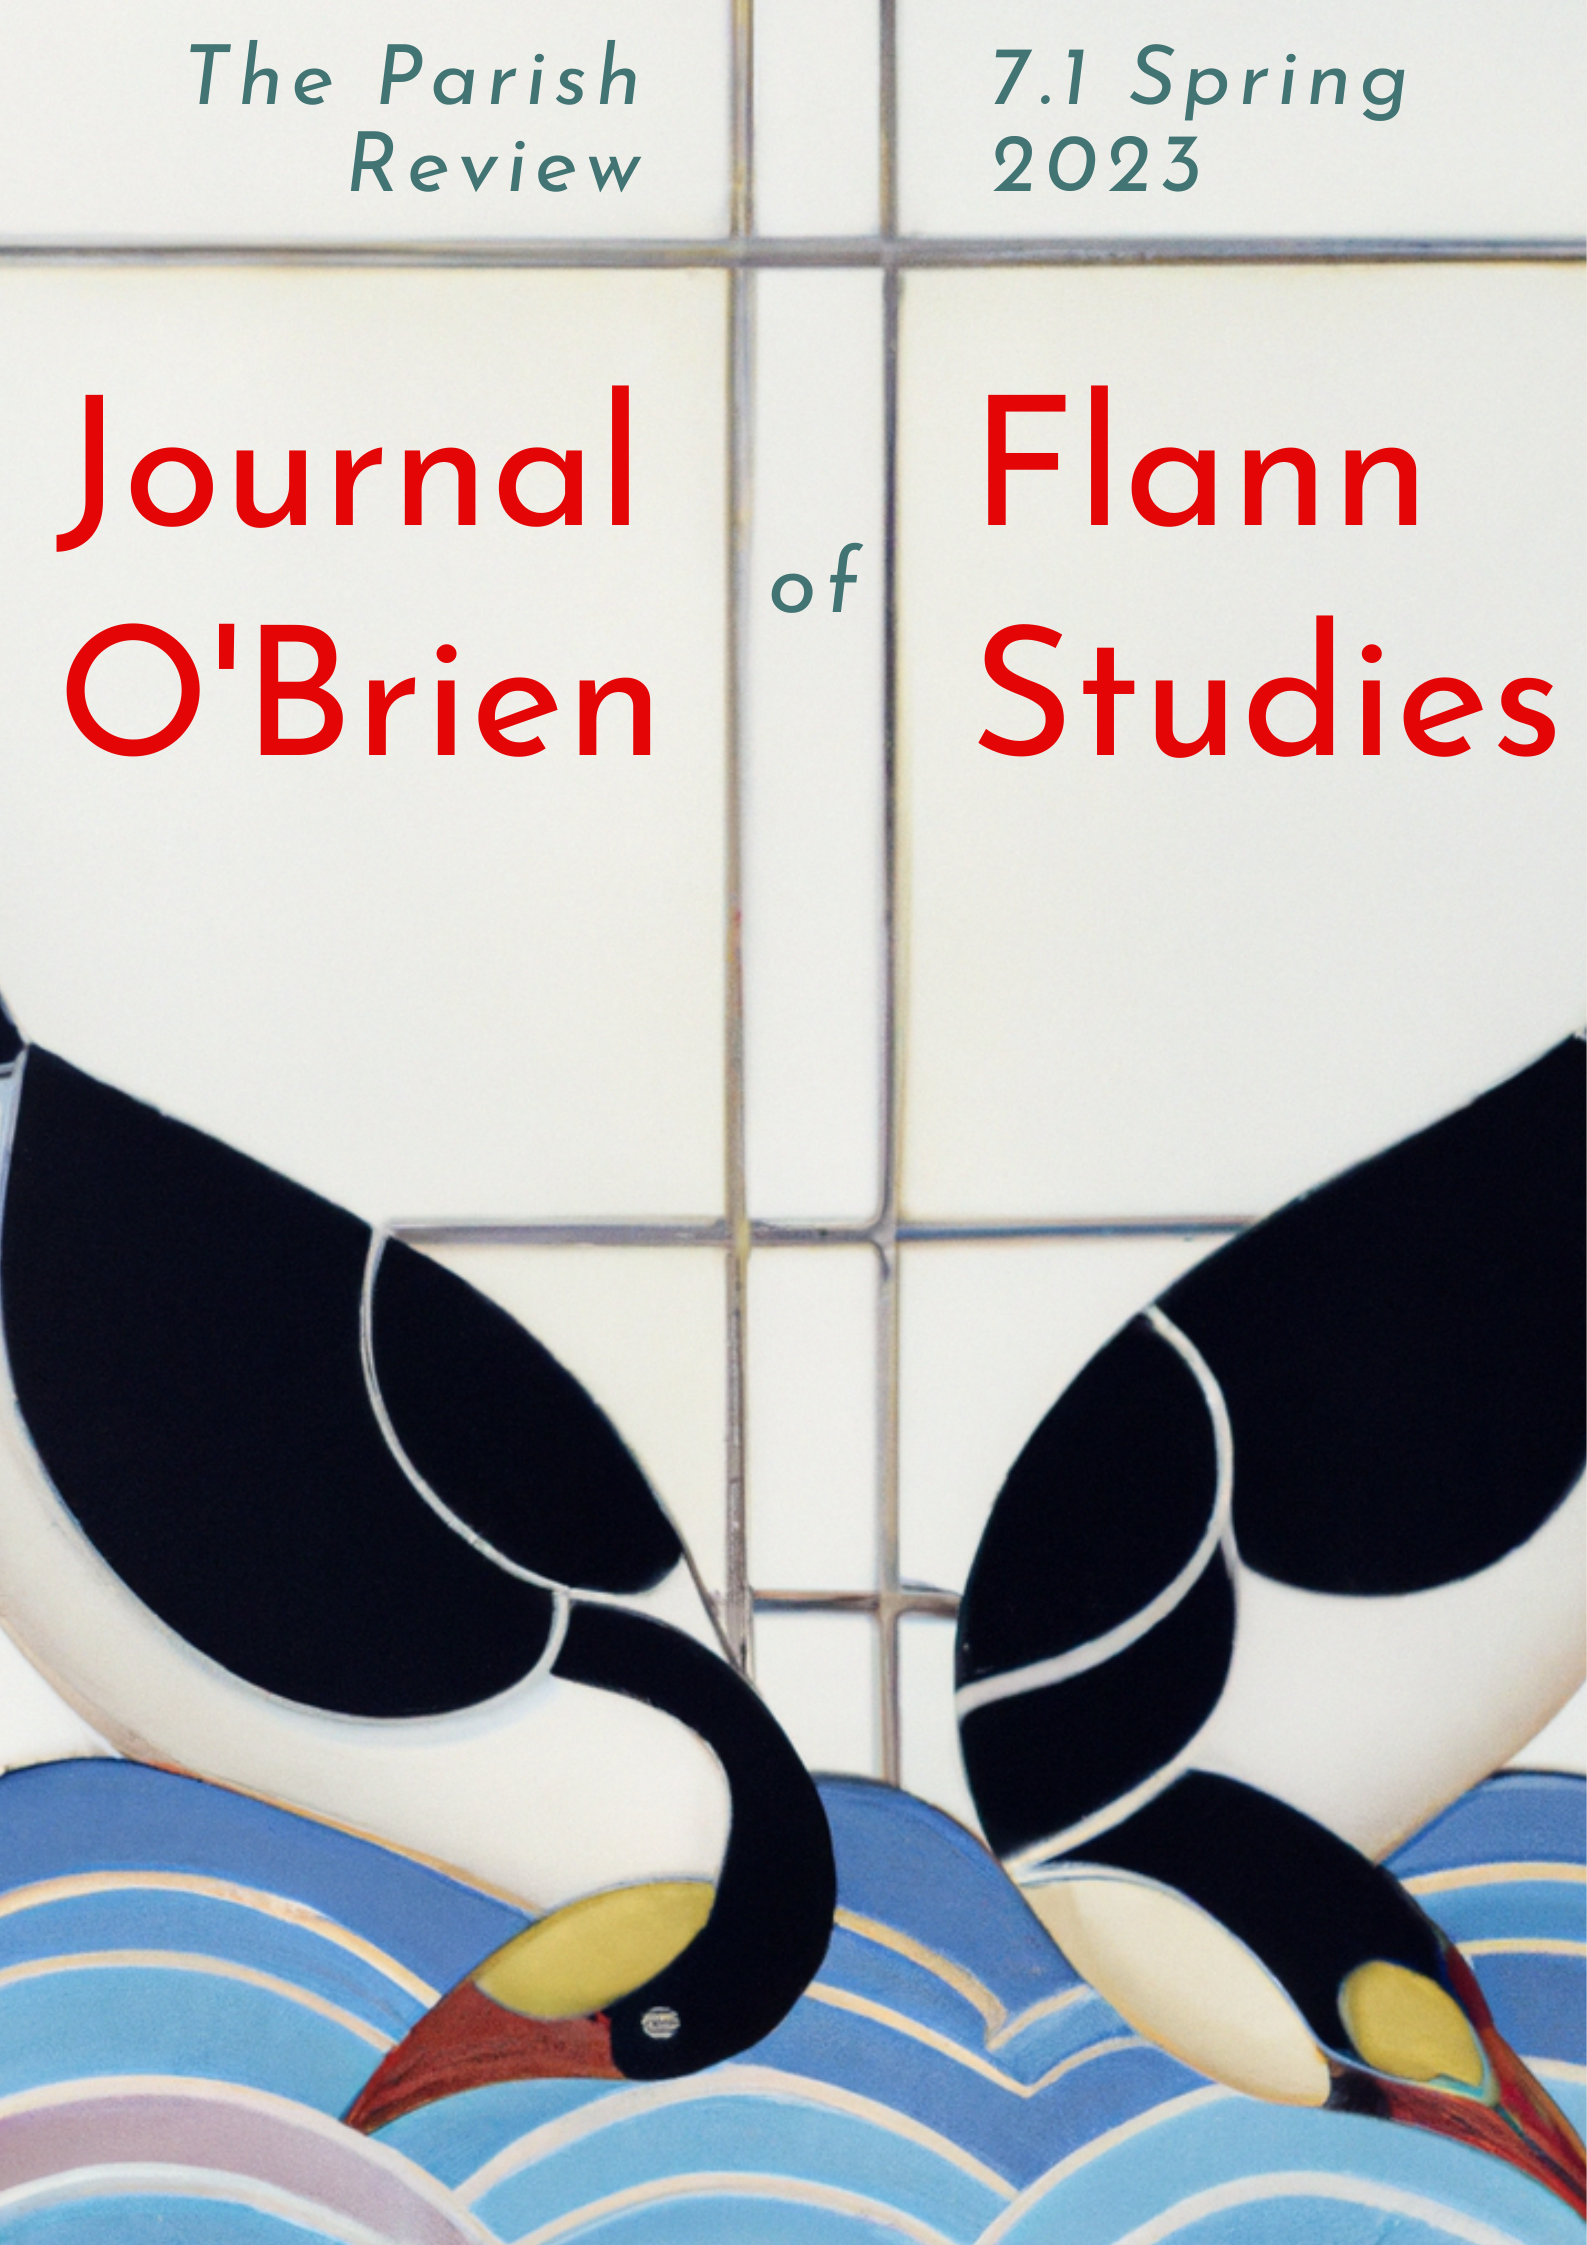 Review of 'Flann O’Brien: Acting Out' (2022), edited by Paul Fagan and Dieter Fuchs